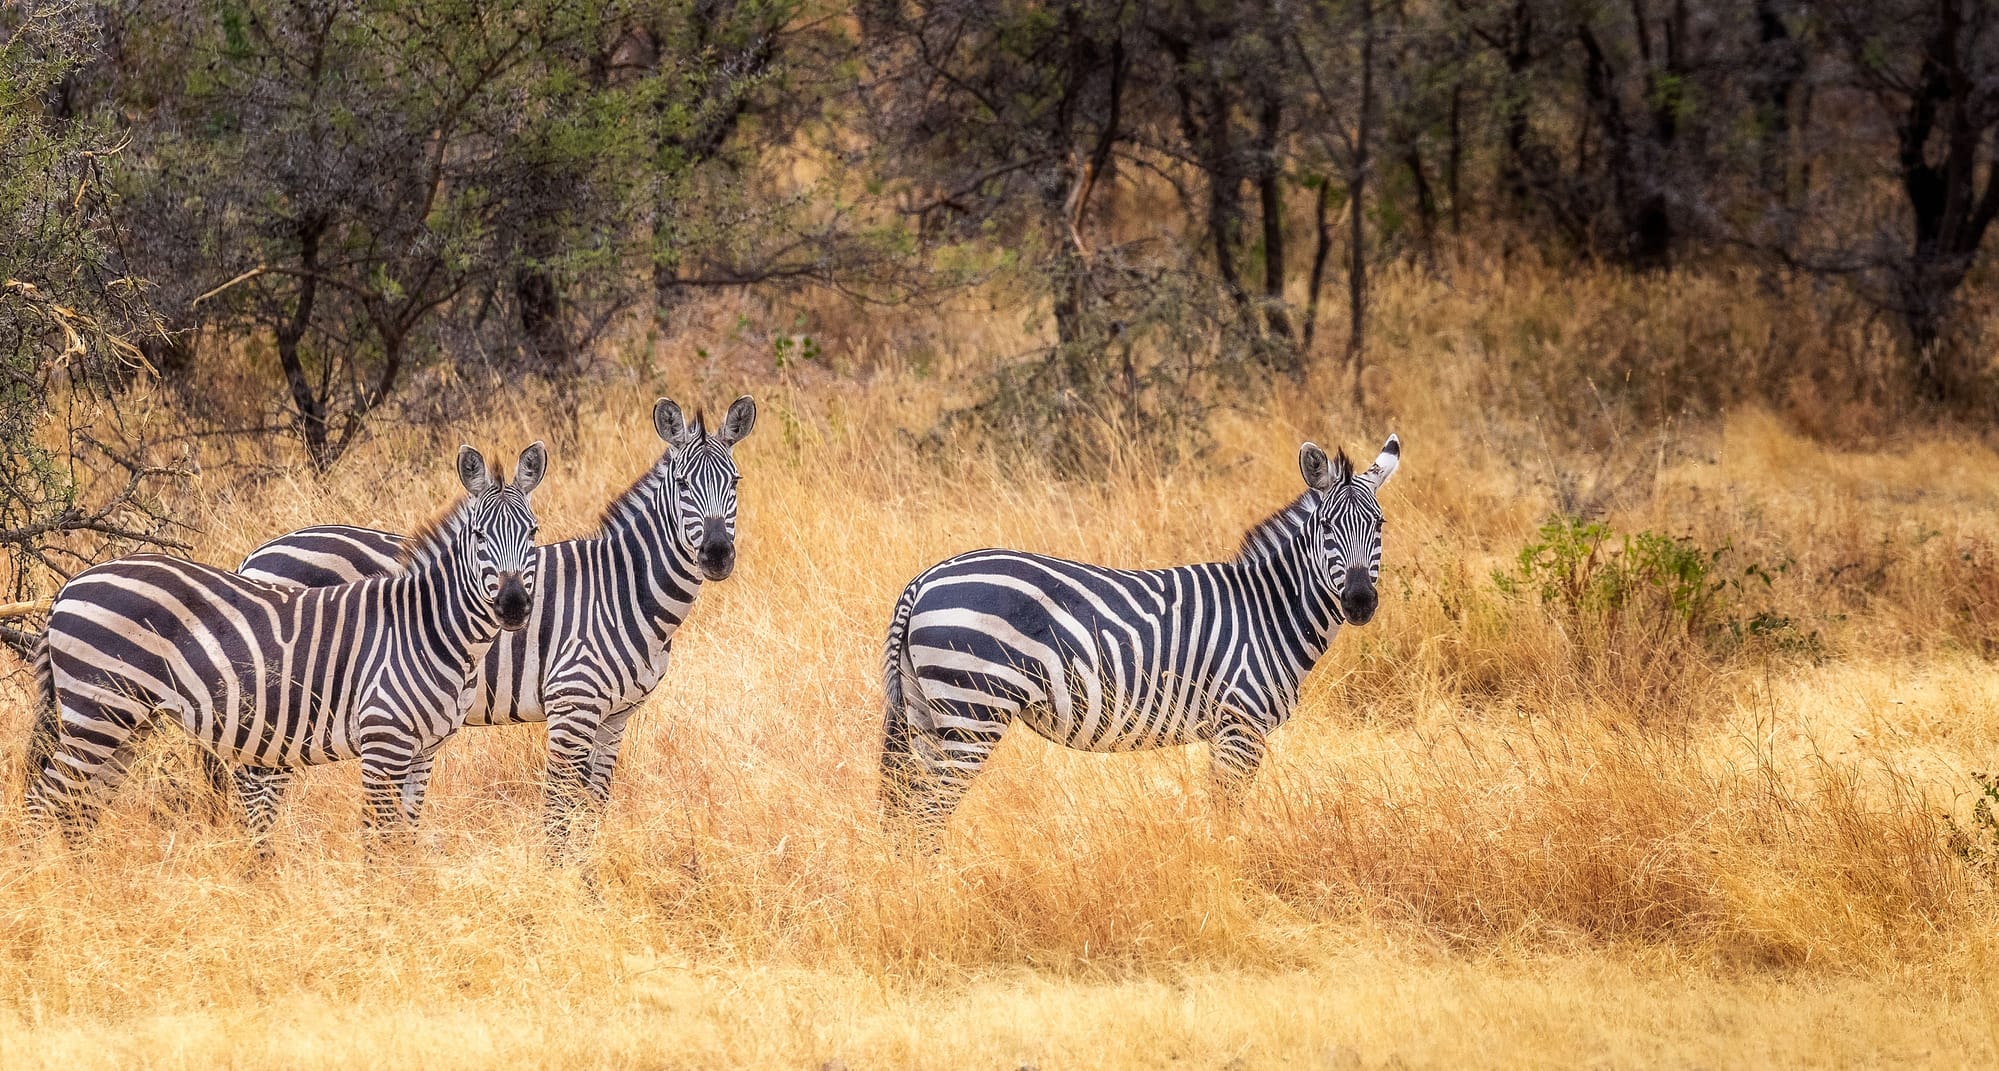 Zebras stand in the African grassland. The perfect view for listening to safari songs.